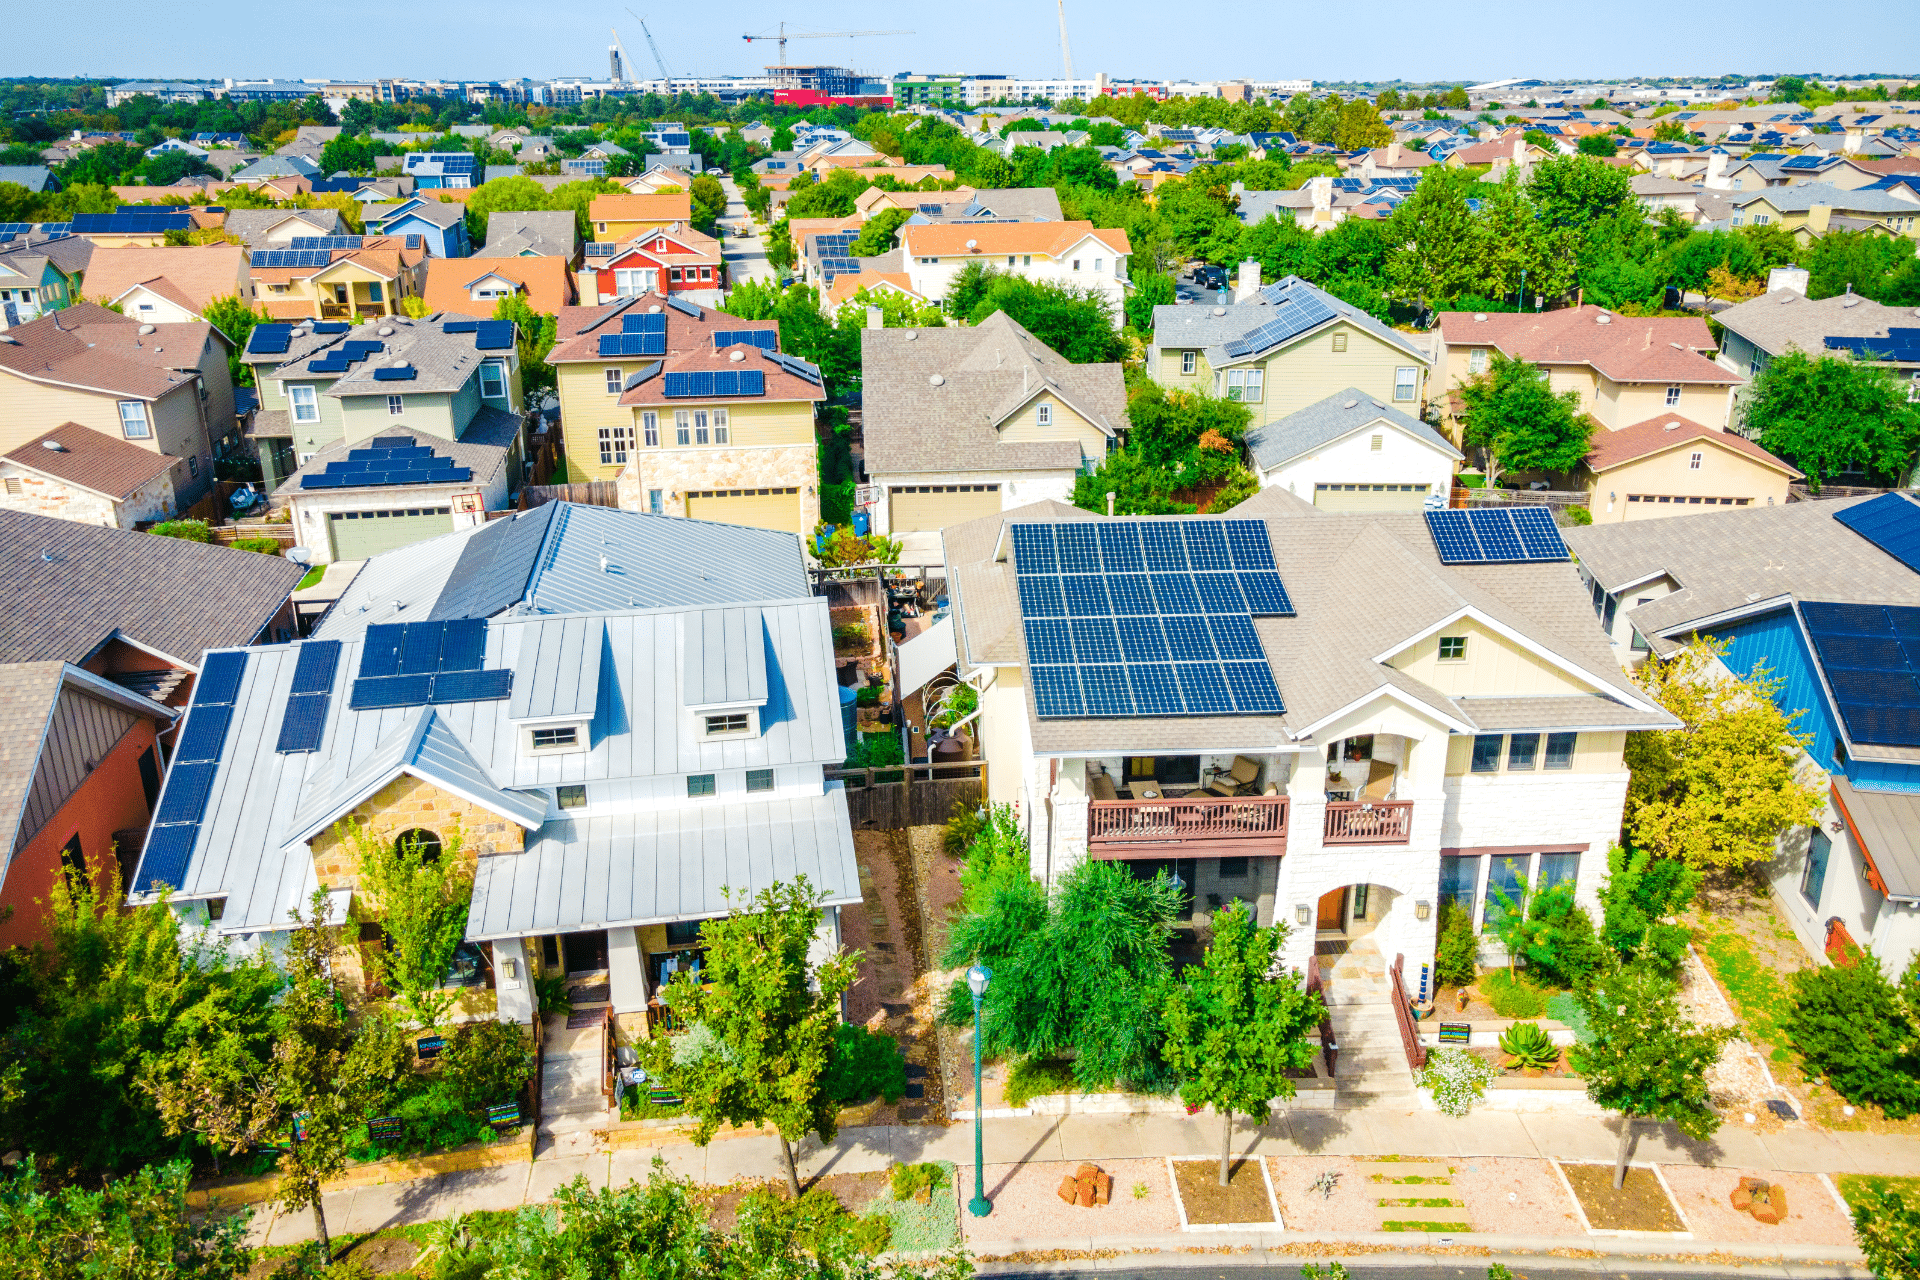 Solar panels in the Mueller community in Texas, an example of a sustainable community